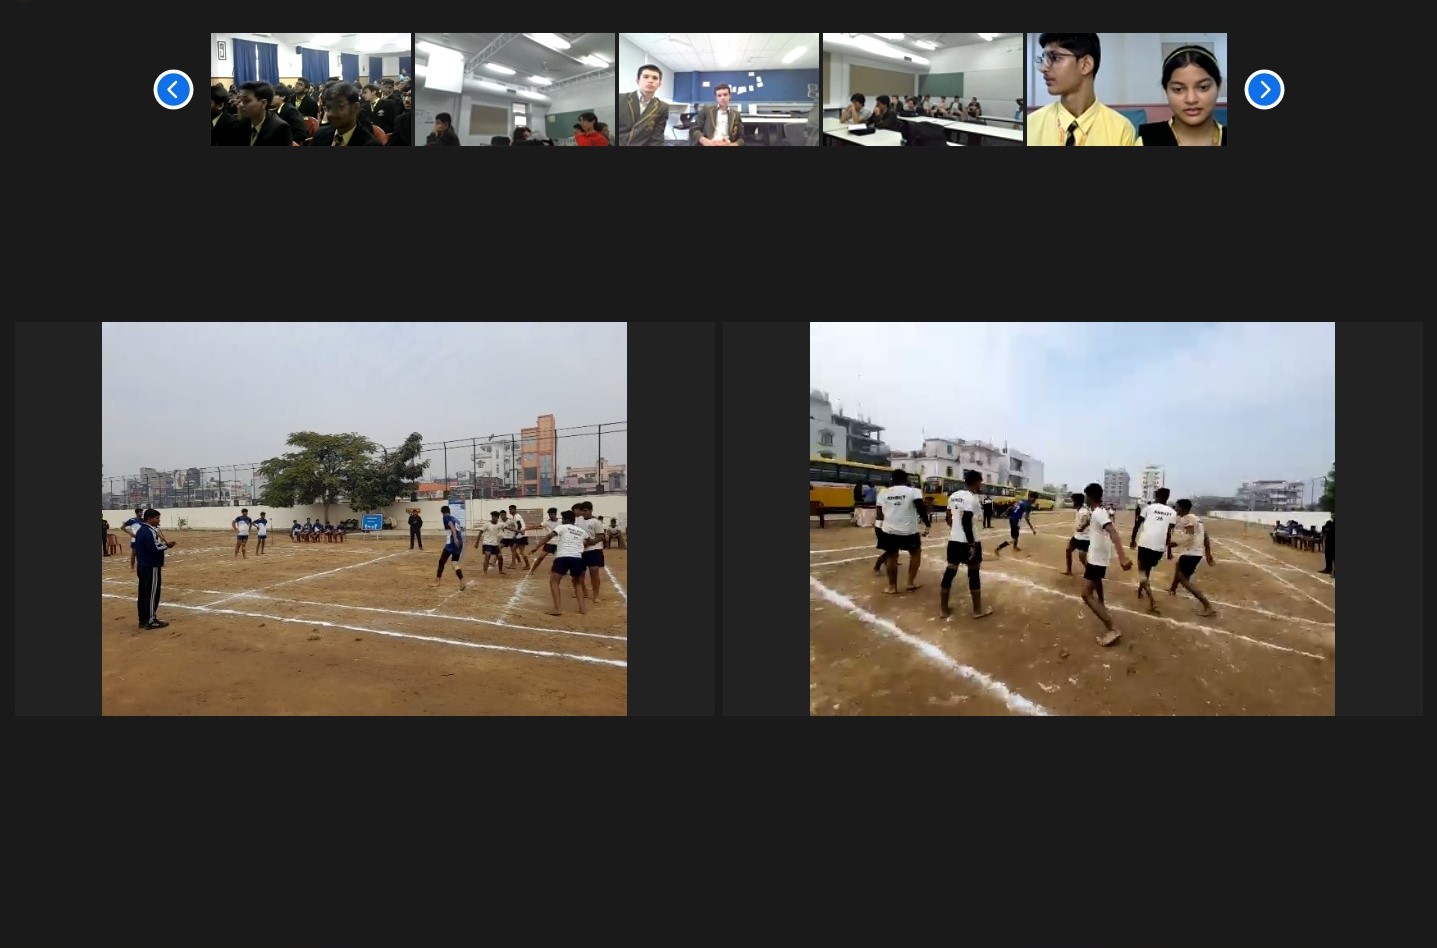 V-YATRA” – A Successful Virtual Cultural Exchange and Live Interactive Session Between St. Karen’s Group of Schools, Patna and Trinity Grammar School, Melbourne, Australia